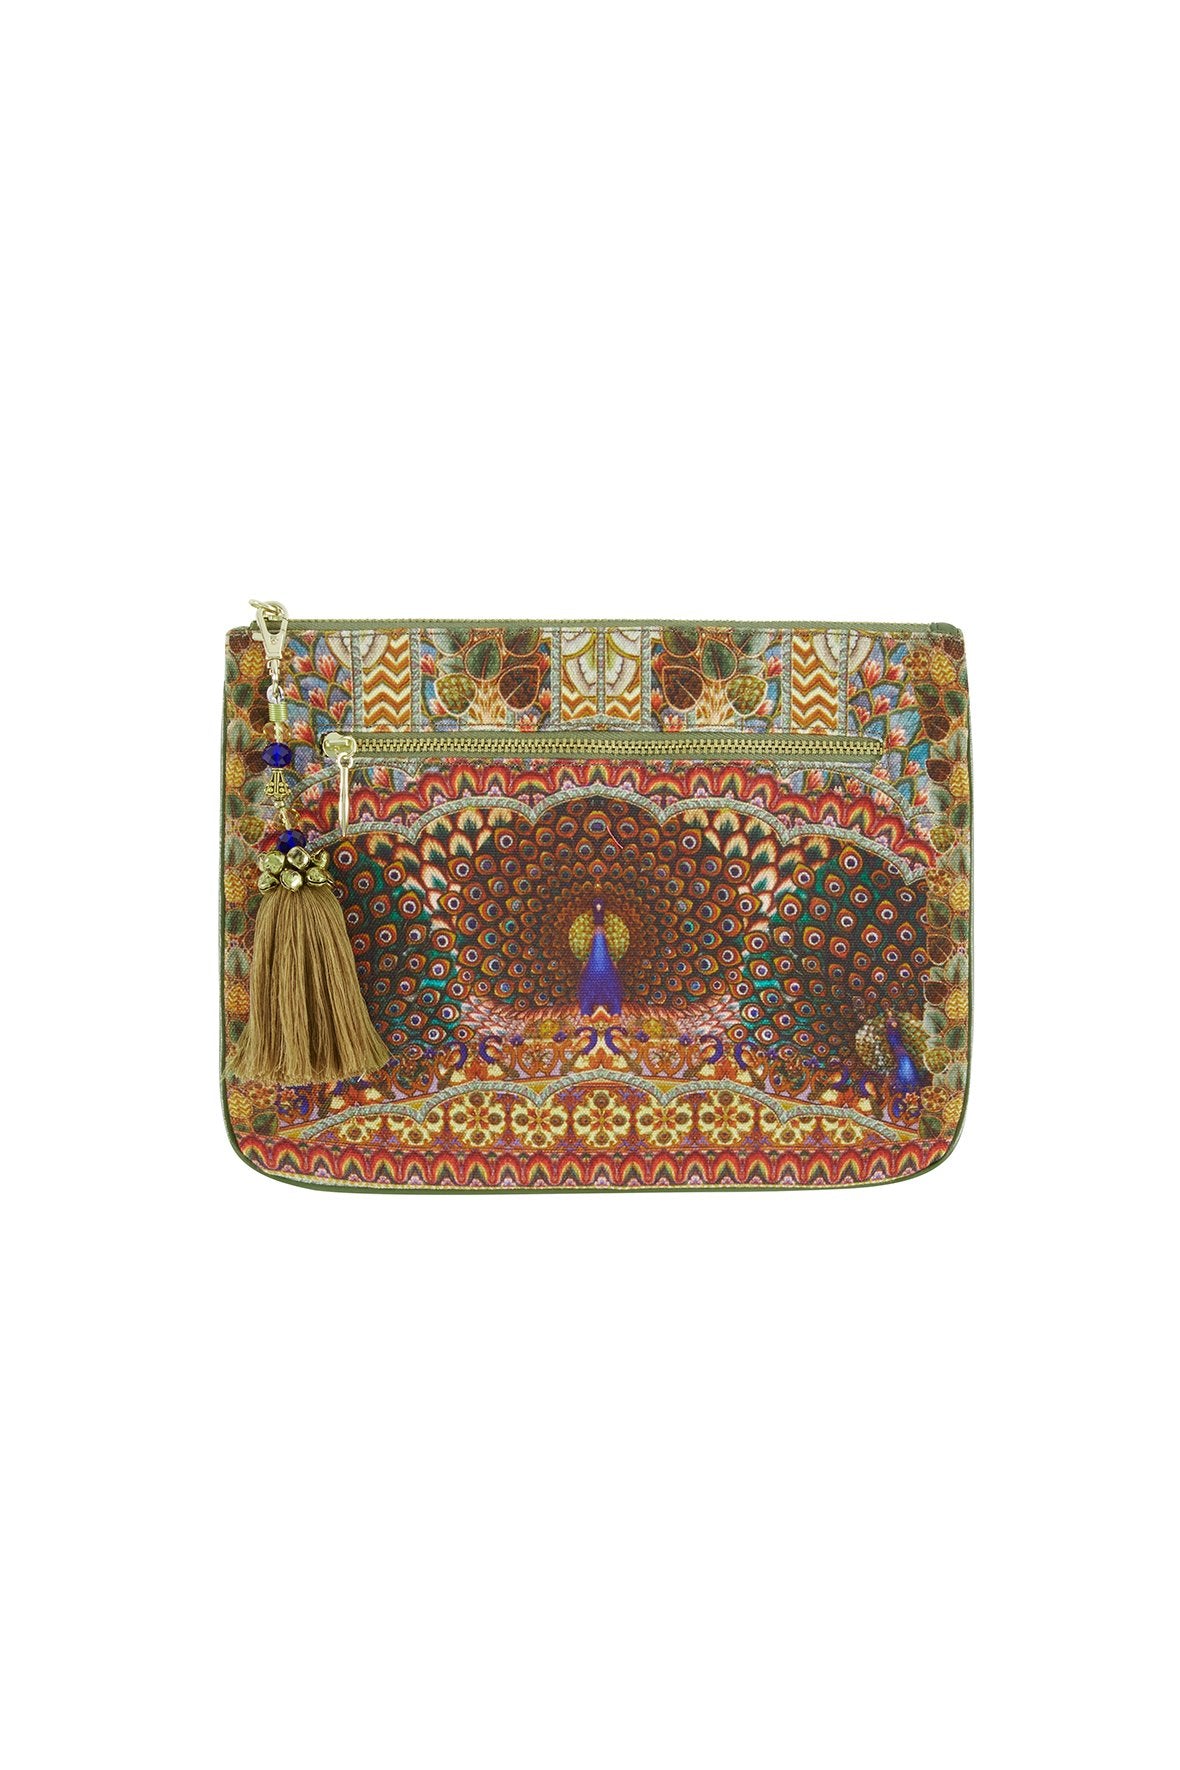 CAMILLA ECHOES OF ENCHANTMENT SMALL CANVAS CLUTCH